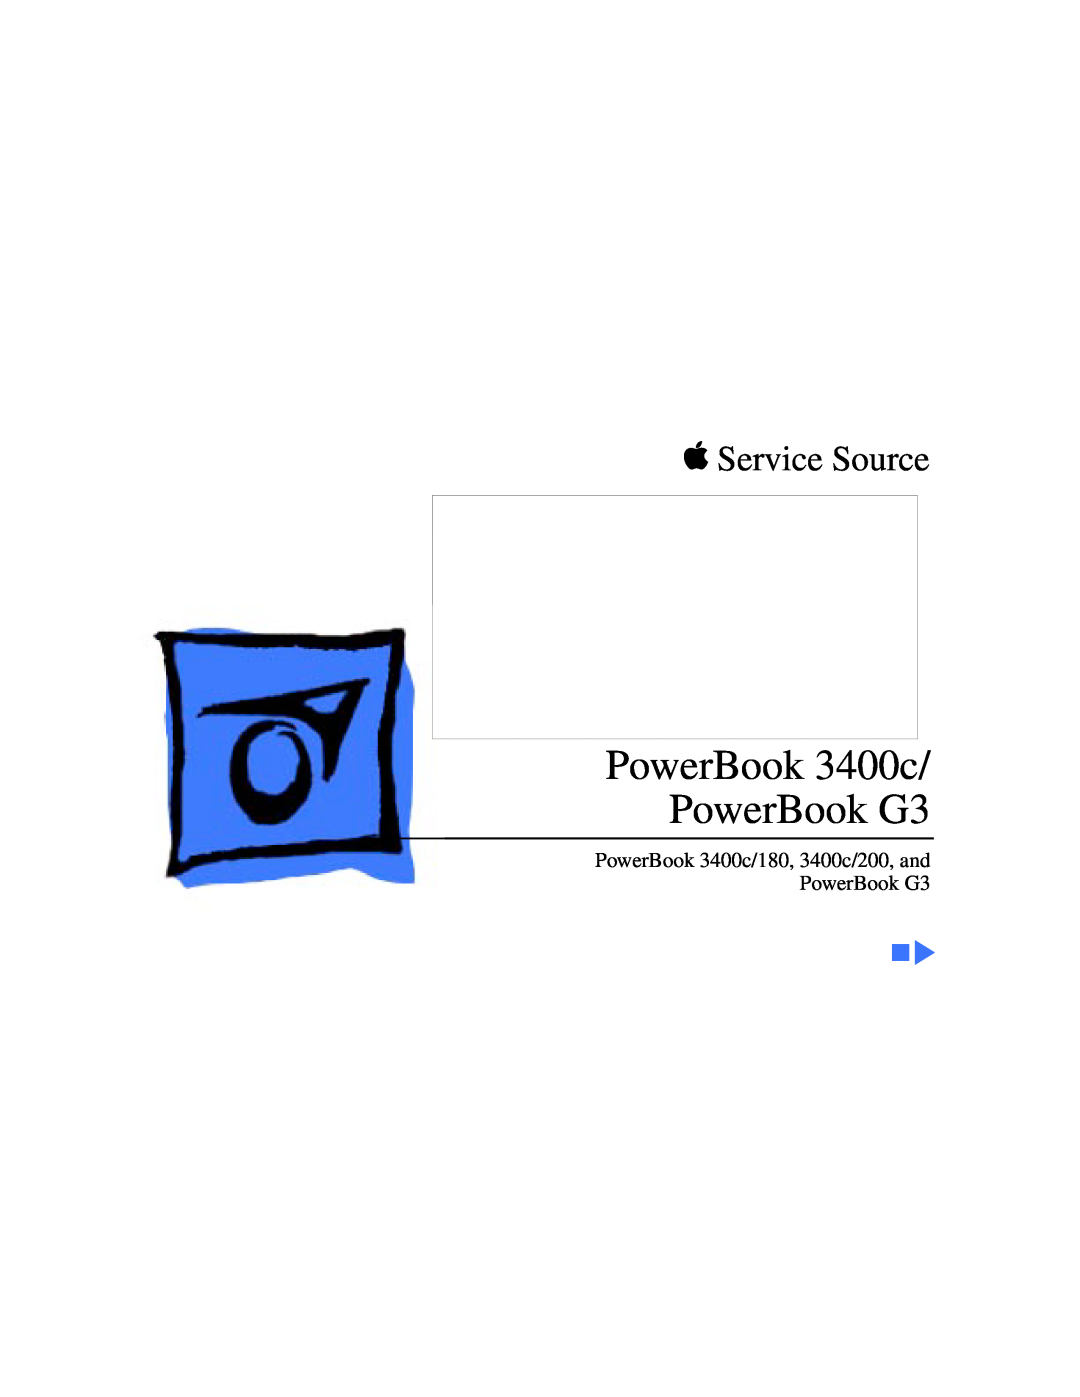 Apple G3 manual Getting Started, With Your PowerBook, Includes setup information for 